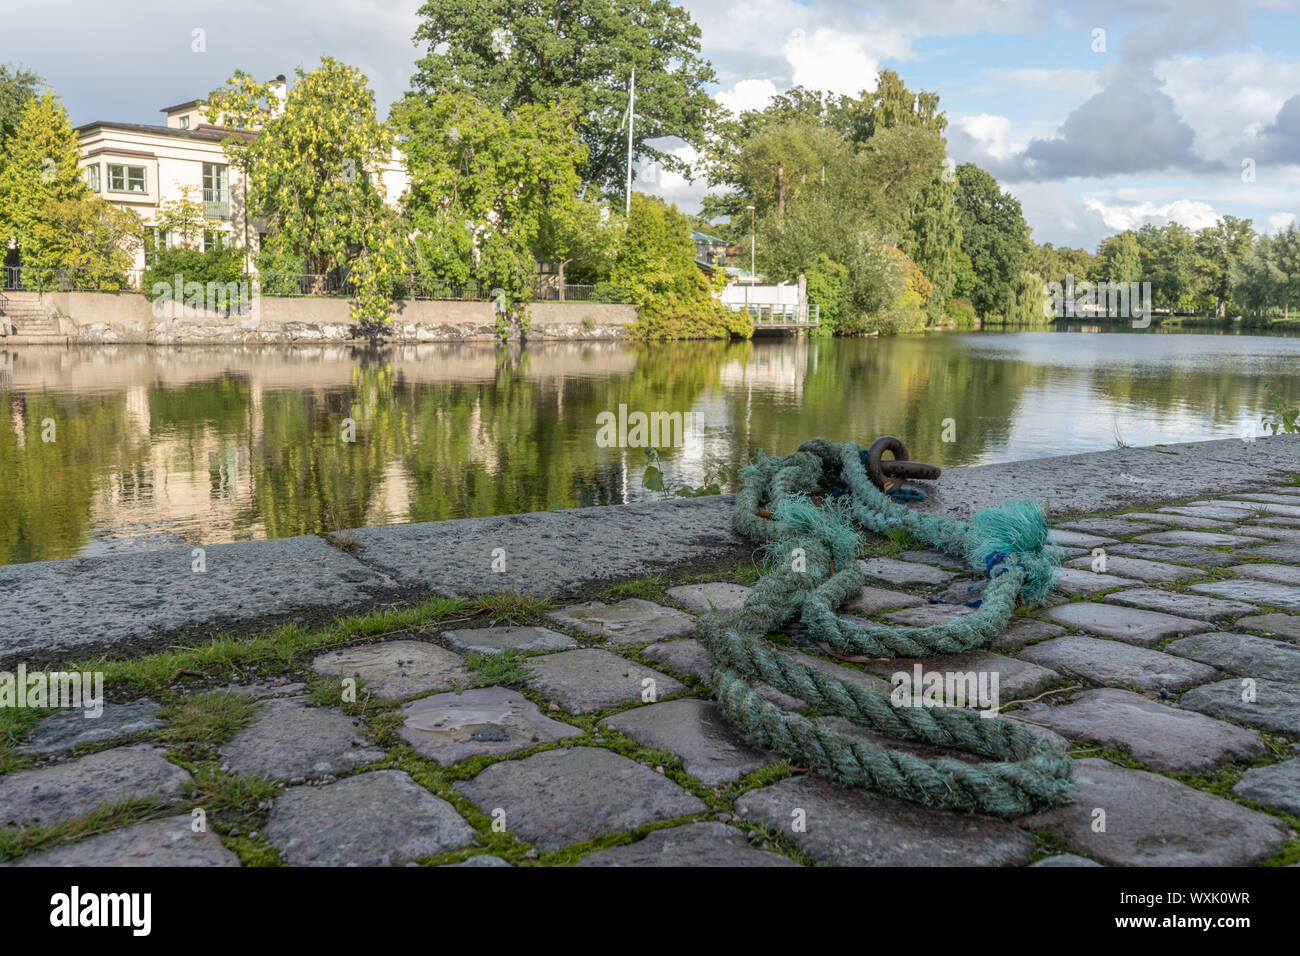 Old, green rope lies on rocky street by river. Orebro city center. Travel photo, background image or illustration. Stock Photo